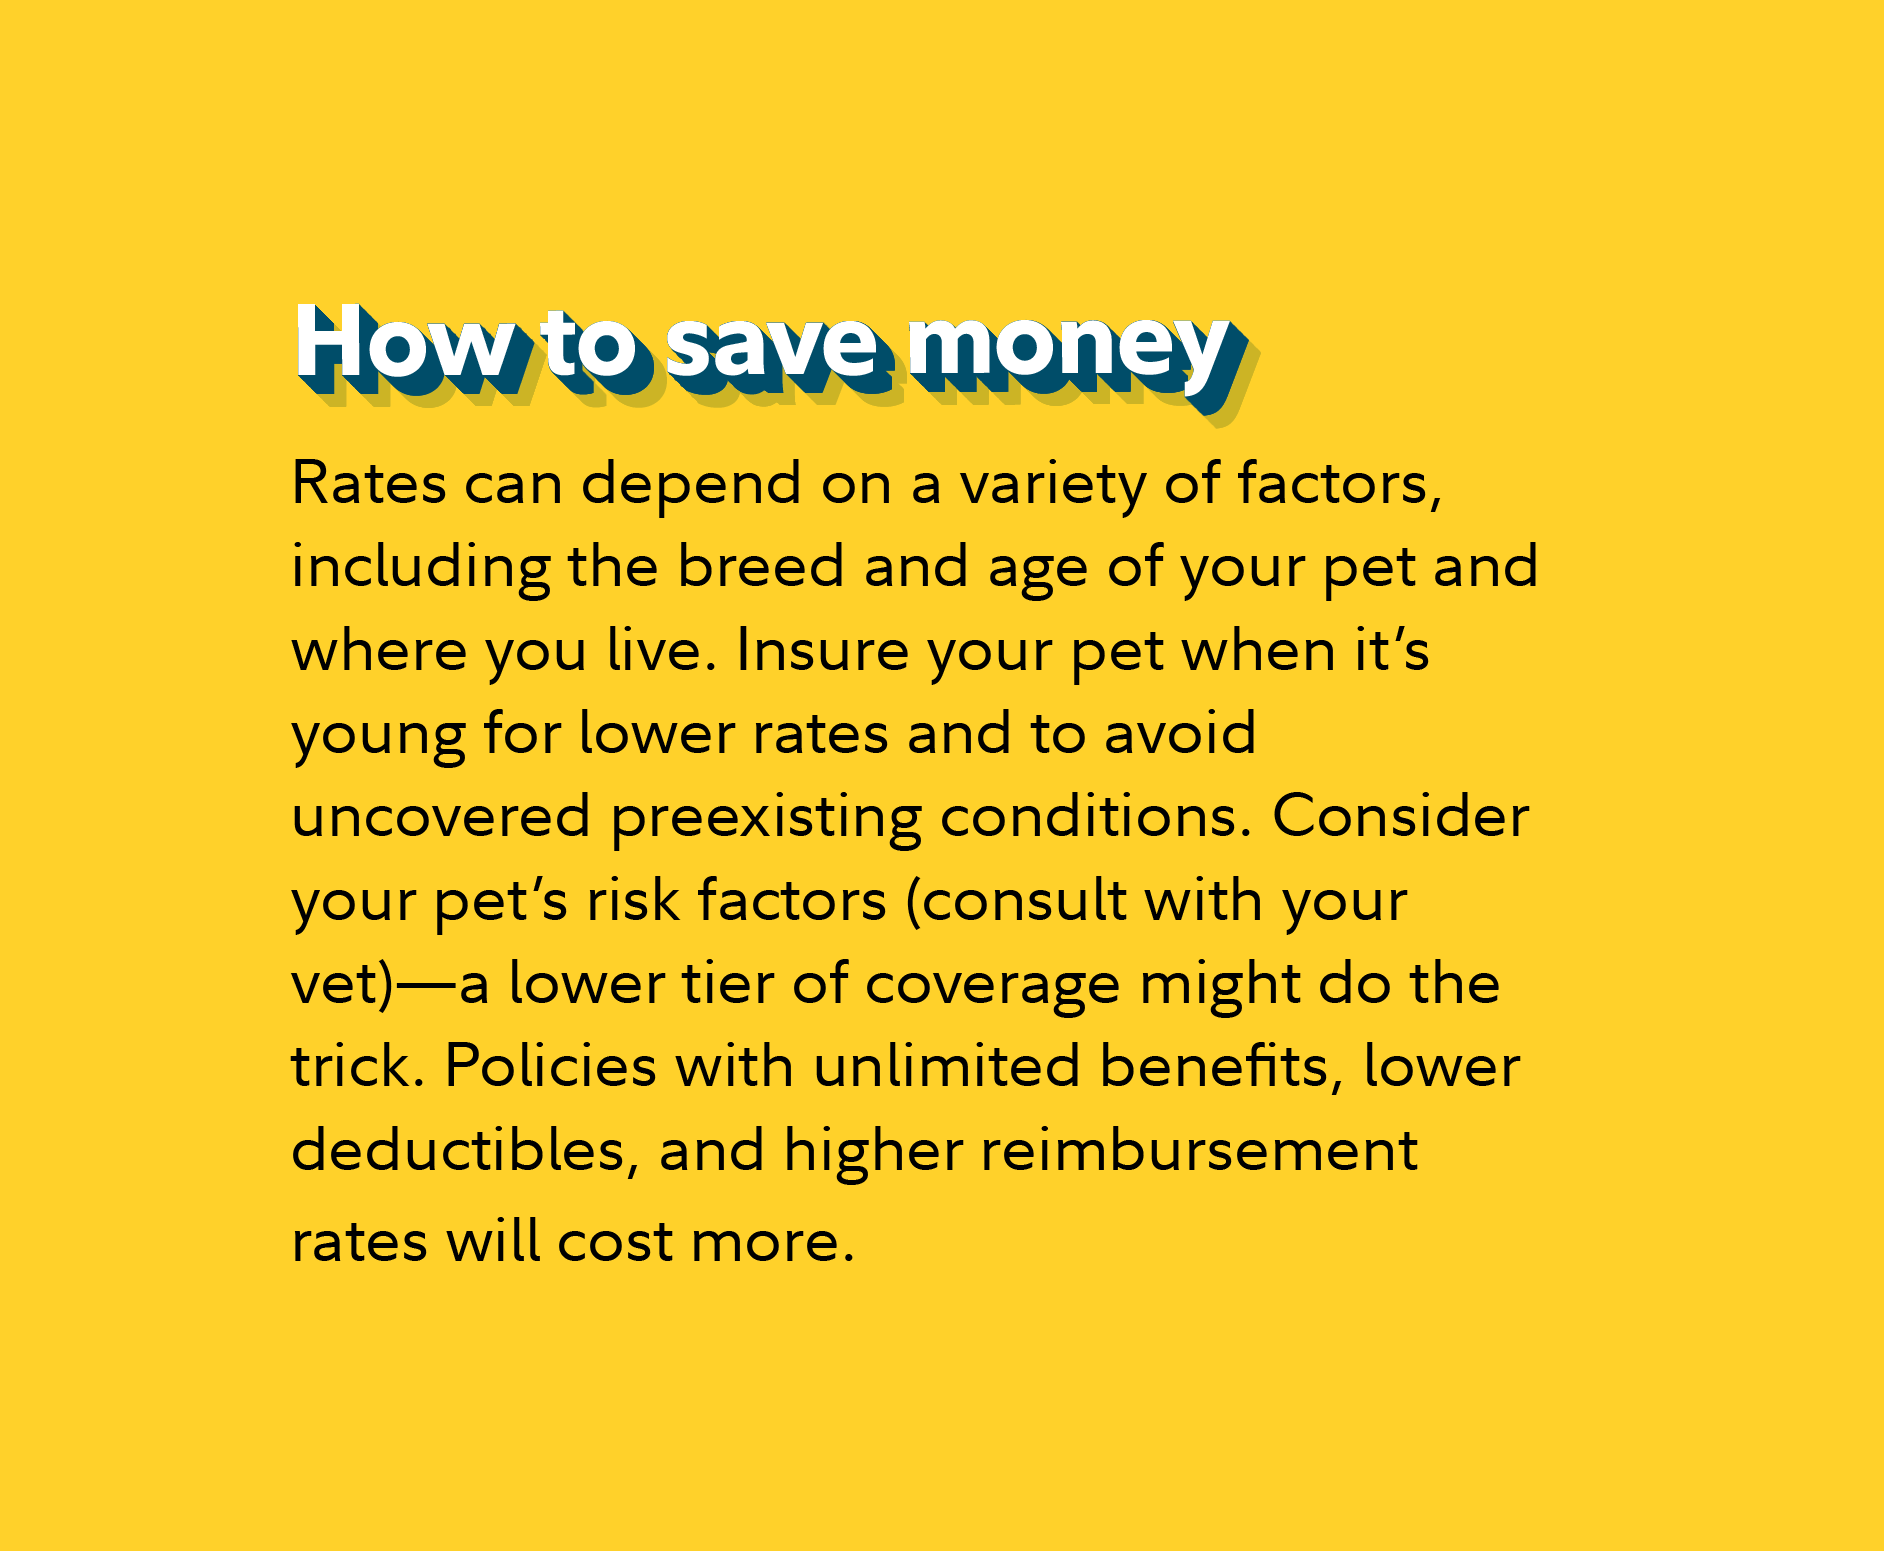 How to save money Rates can depend on a variety of factors, including the breed and age of your pet and where you live. Insure your pet when it’s young for lower rates and to avoid uncovered preexisting conditions. Consider your pet’s risk factors (consult with your vet)—a lower tier of coverage might do the trick. Policies with unlimited benefits, lower deductibles, and higher reimbursement rates will cost more.